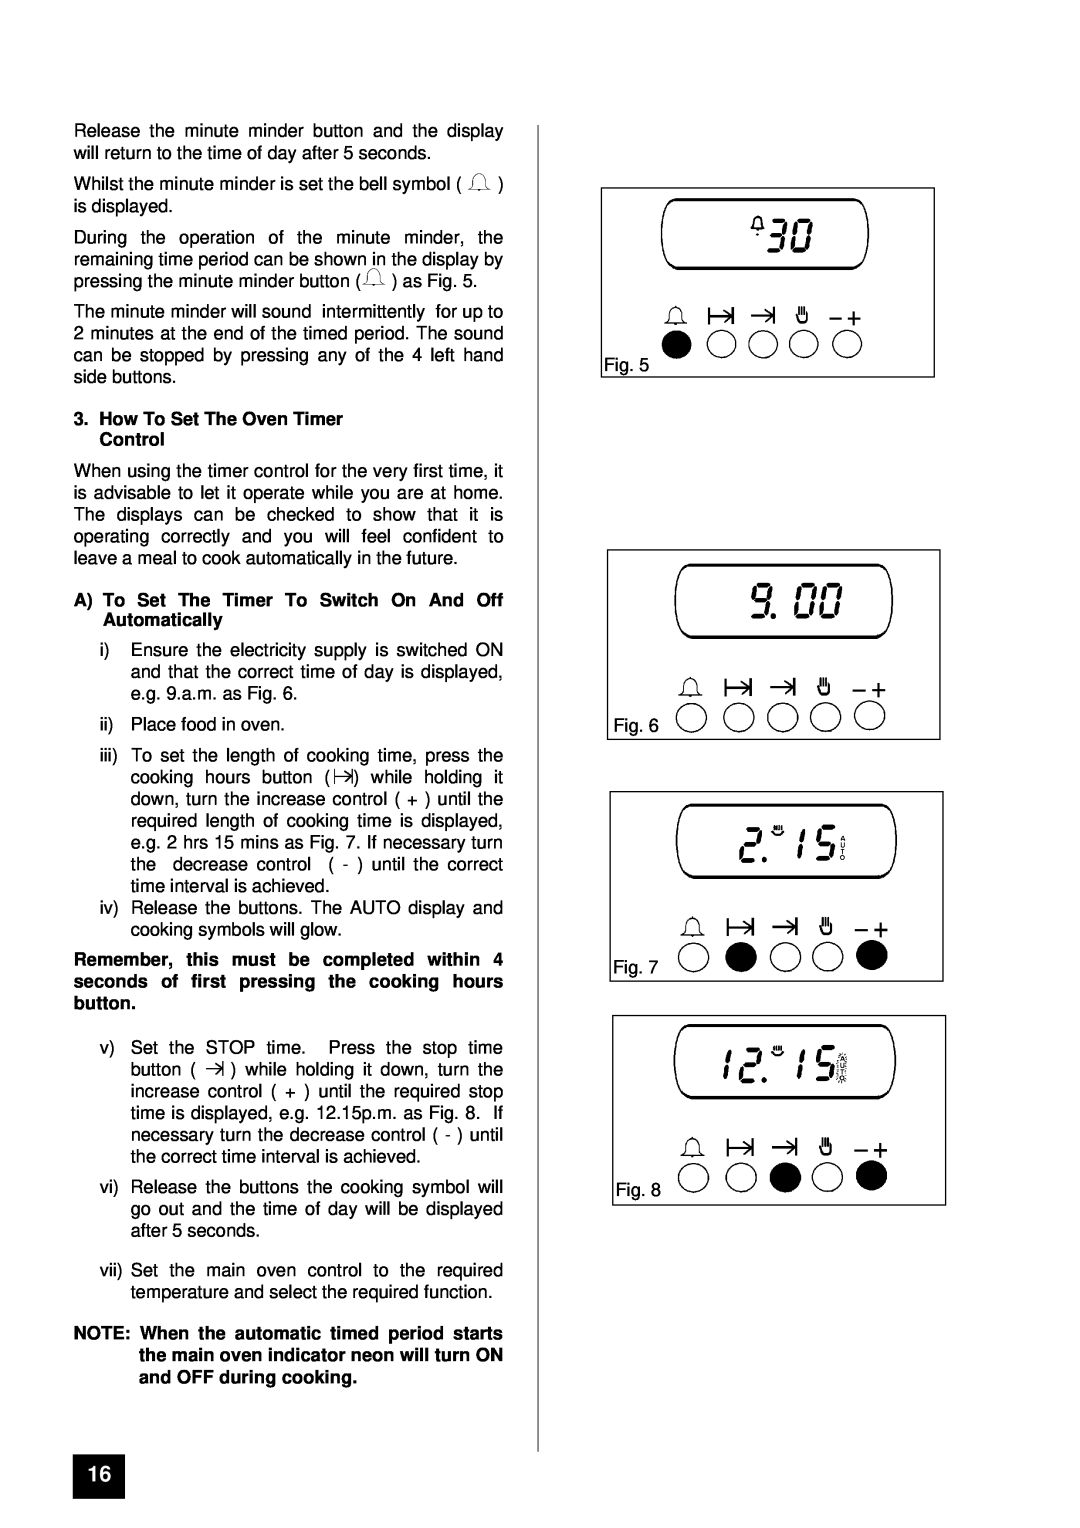 Zanussi ZDF867X manual How To Set The Oven Timer Control, A To Set The Timer To Switch On And Off Automatically 